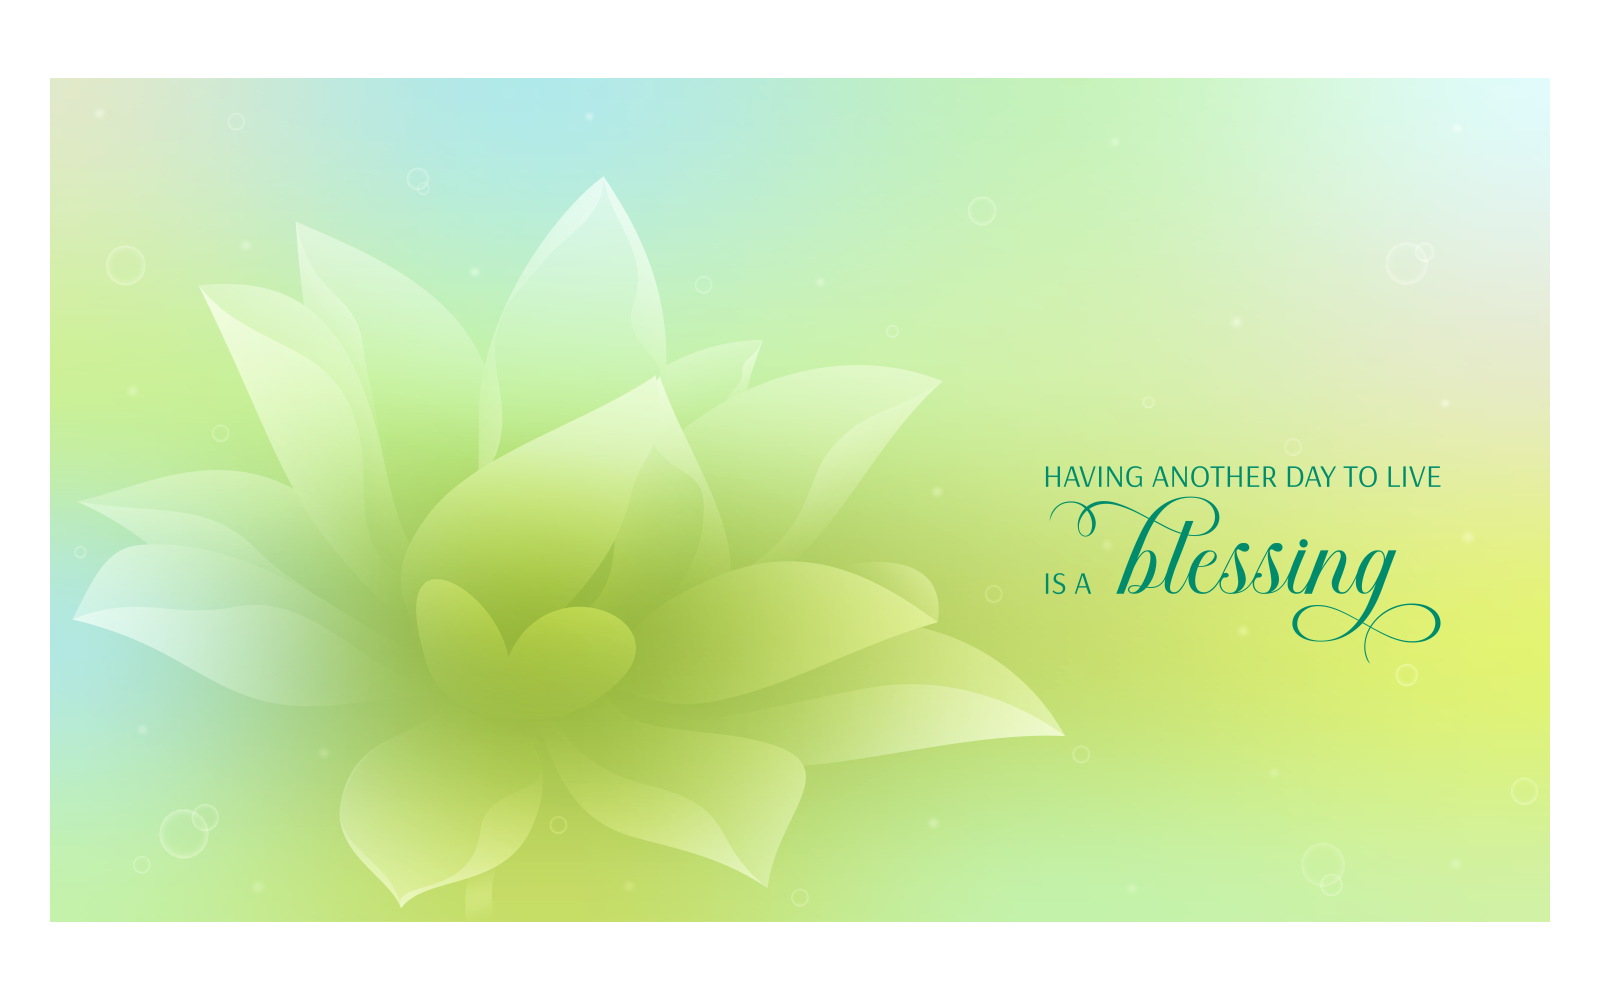 Inspirational Backgrounds 14400x8100px With Lotus And Quote About Blessing